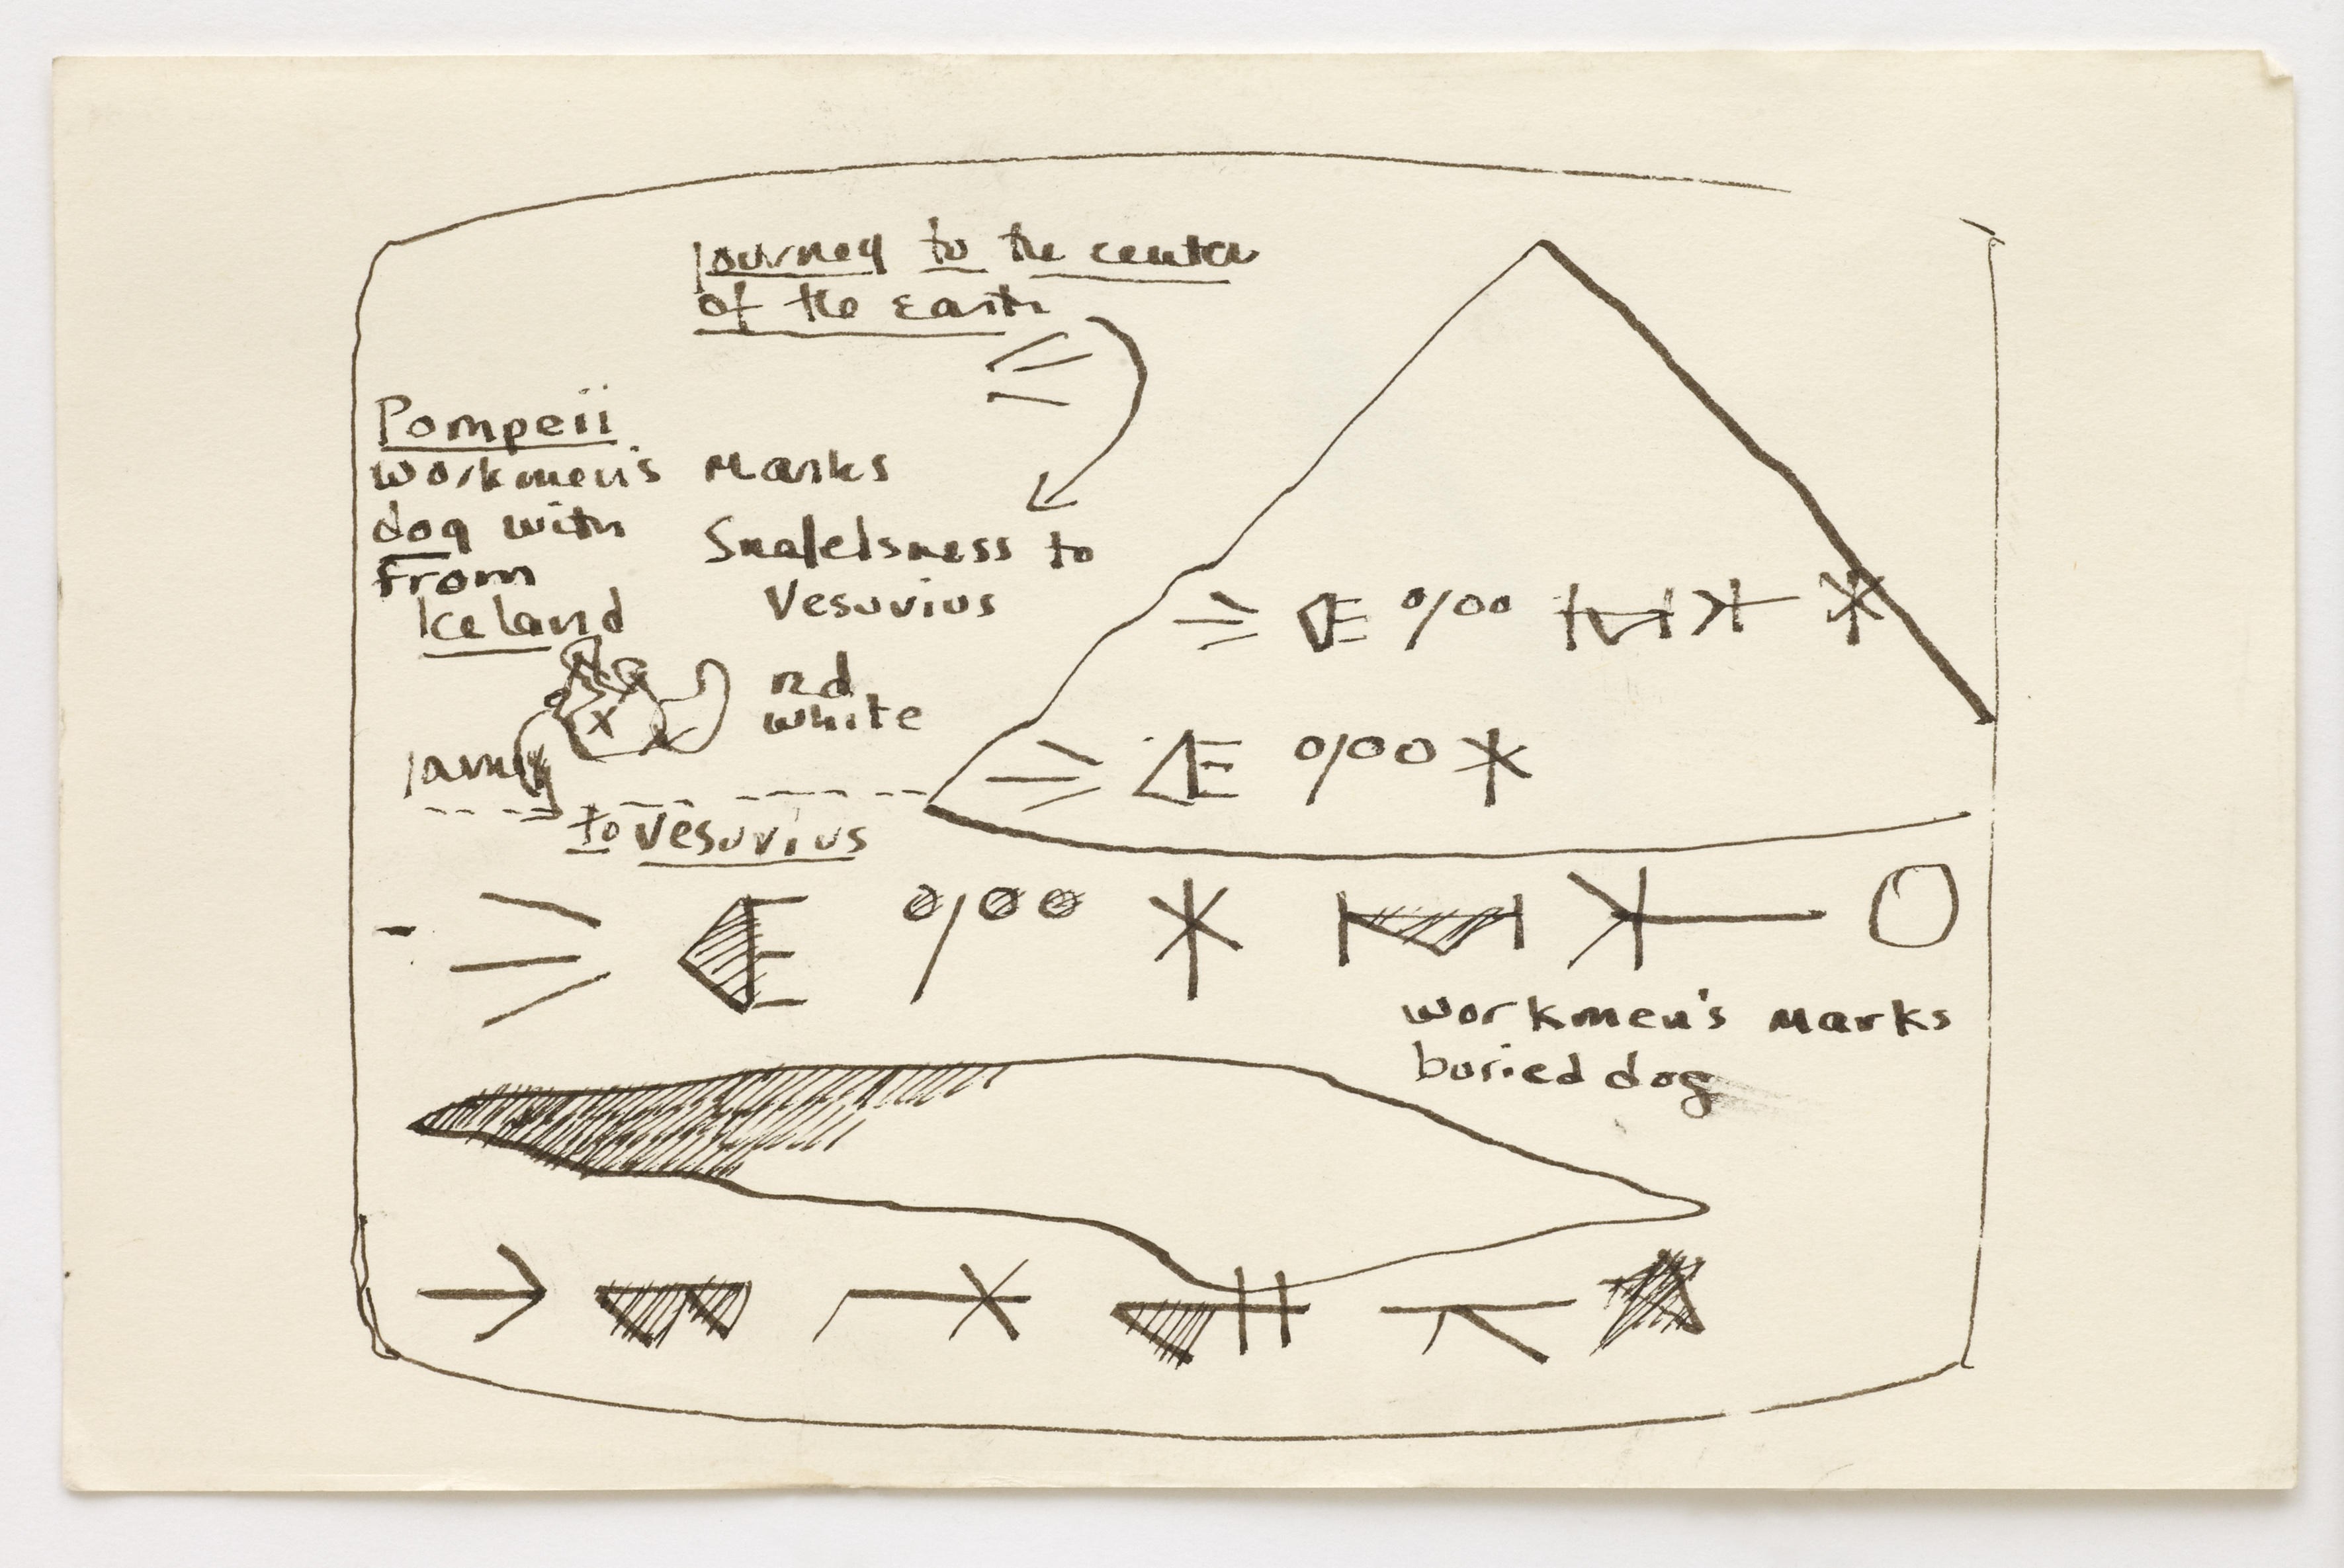 Drawing using ink on paper of a diagram of a mountain above two rows of geometric shapes. The text reads &quot;Journey to the centre of the earth. Pompeii From Iceland to vesuvius workmen's marks buried dog&quot;